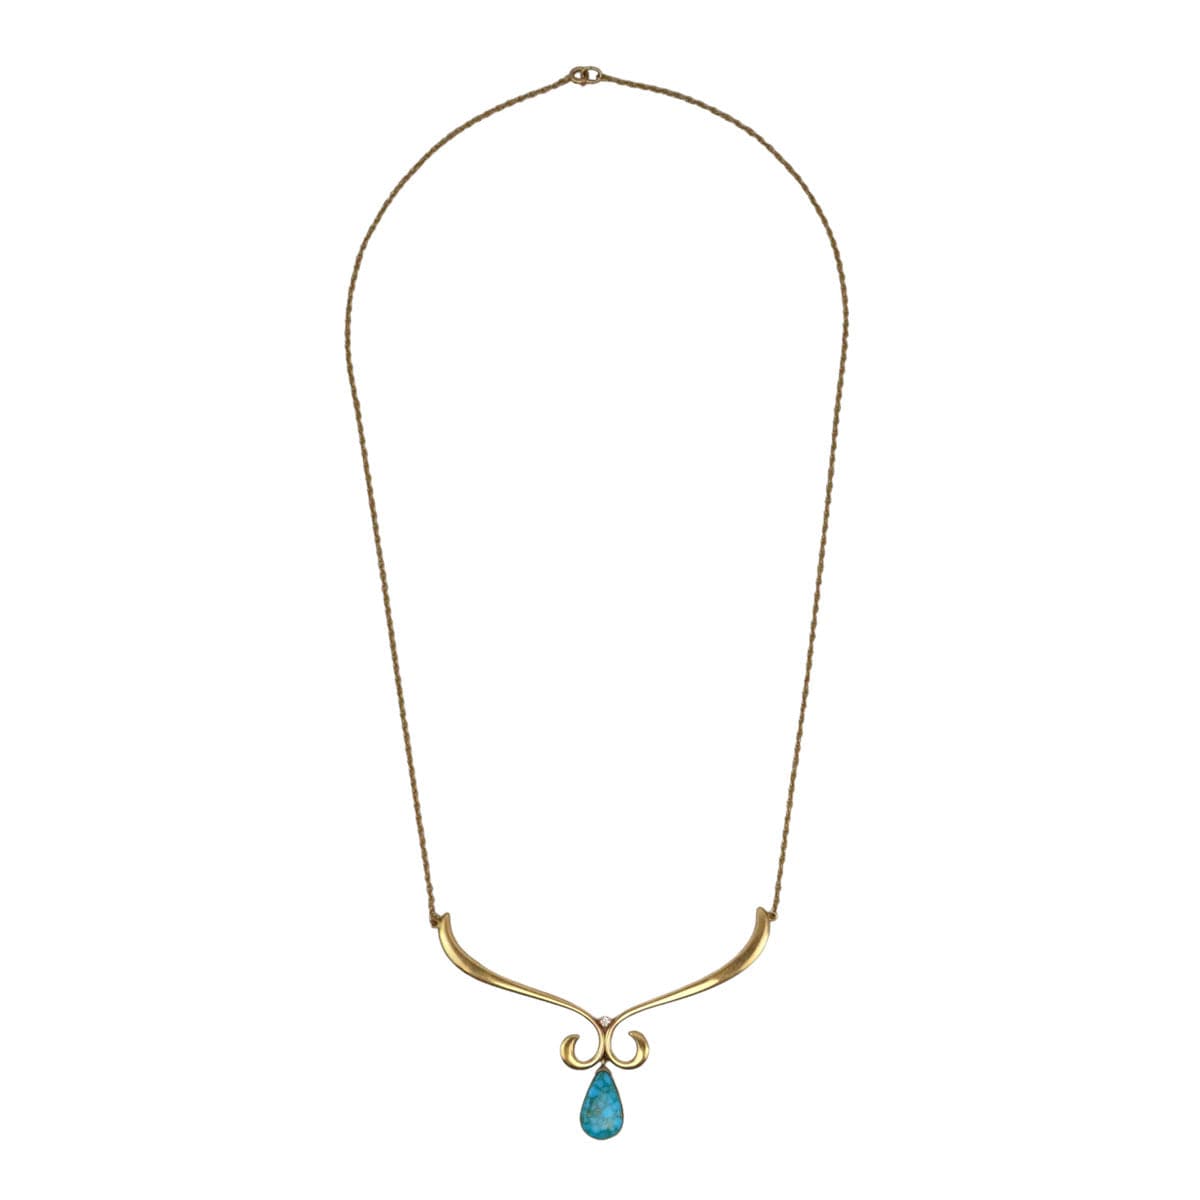 Frank Patania Jr. - Turquoise and 14K Gold Necklace, 16" length (J91699-1222-026) 1